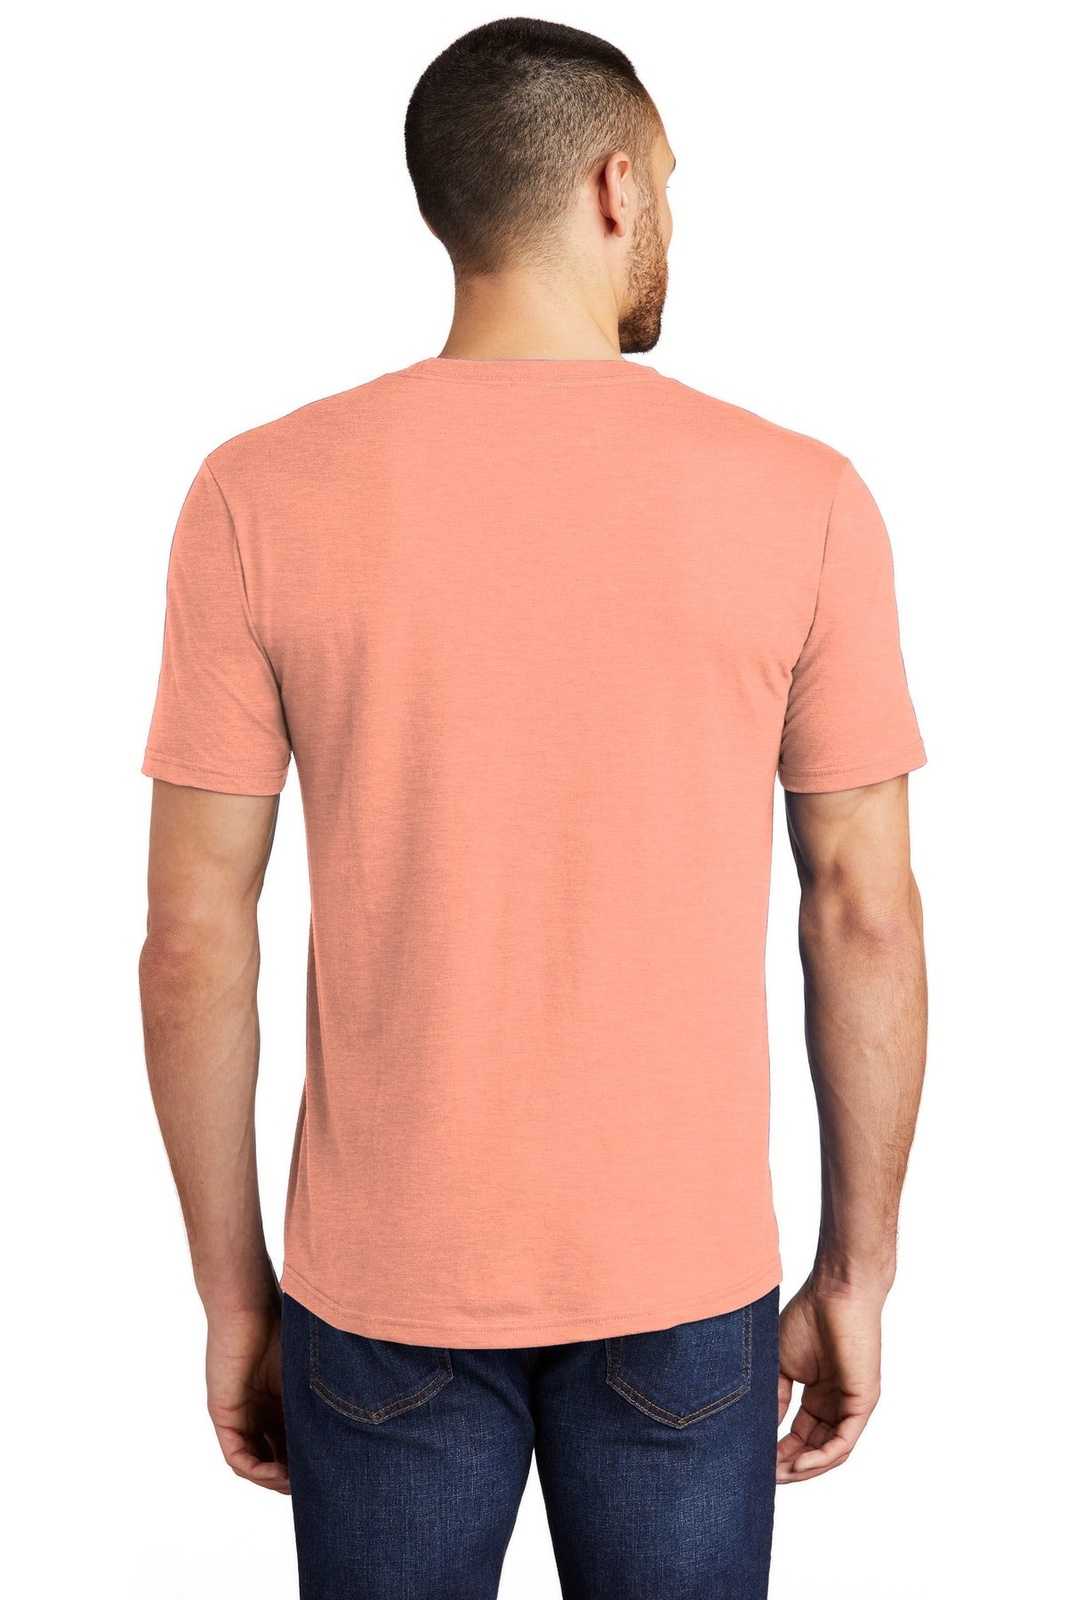 District DM130 Perfect Tri Tee - Heathered Dusty Peach - HIT a Double - 2